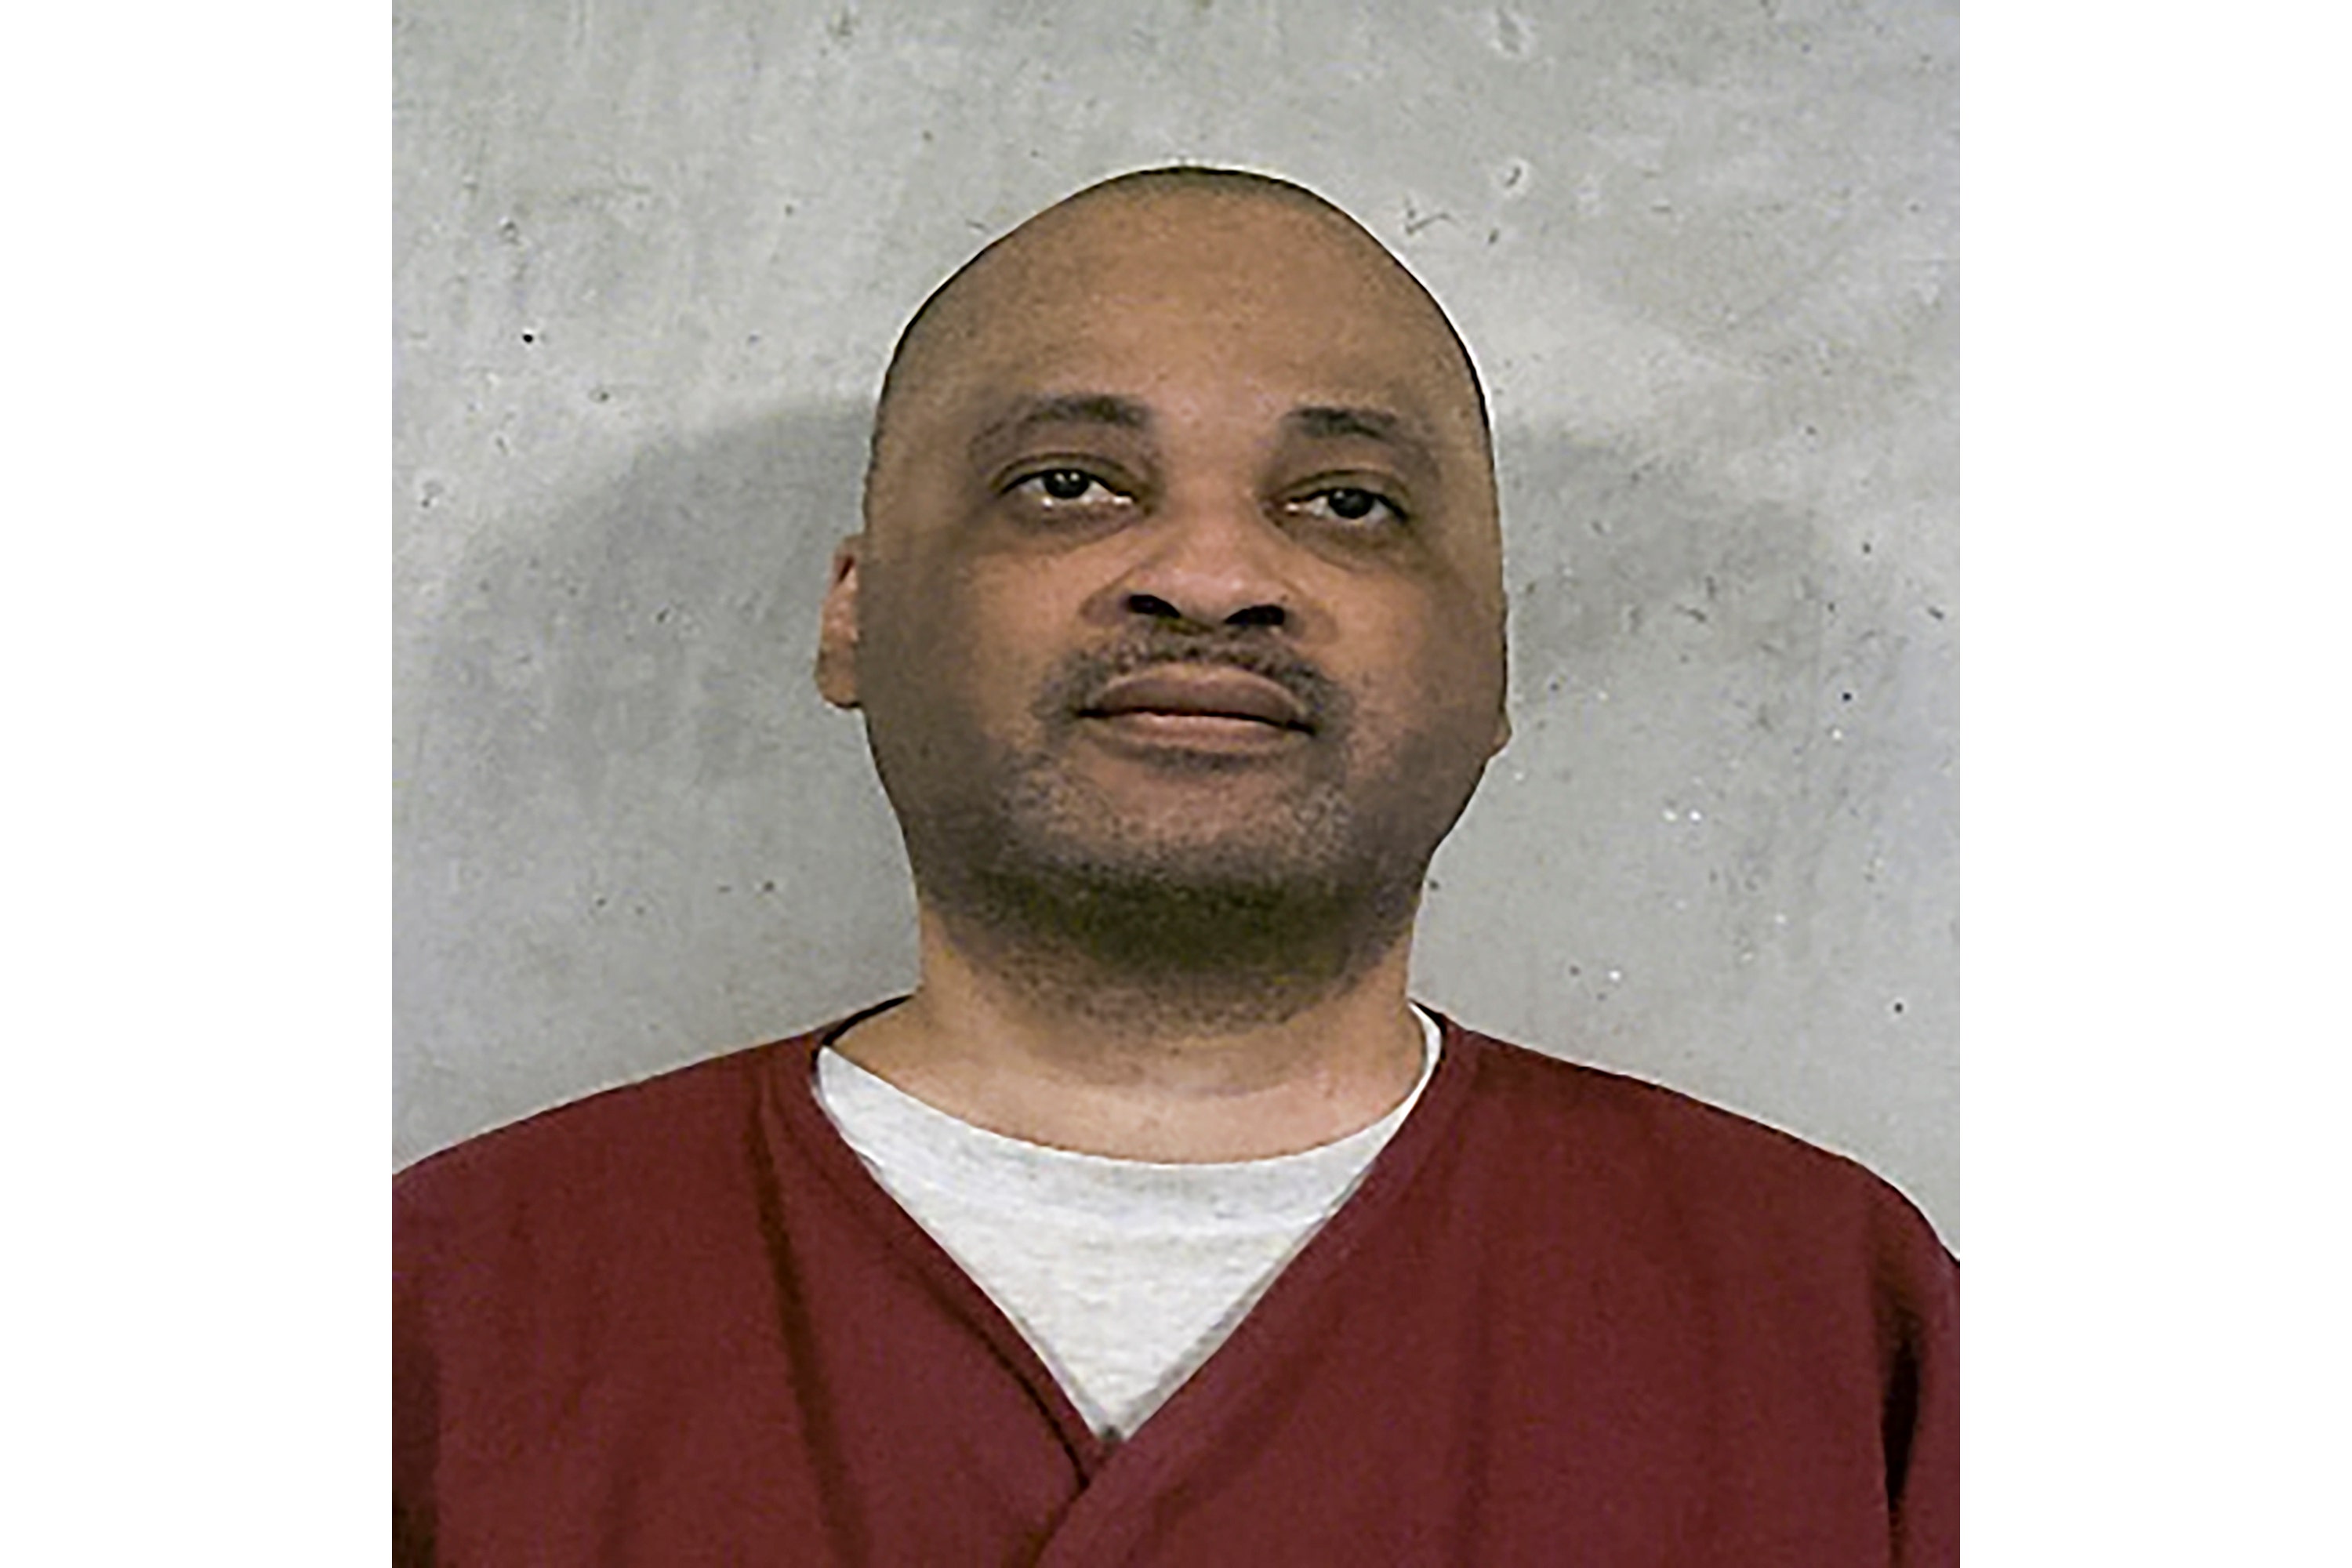 Oklahoma executes death row inmate who killed 20-year-old woman with butcher knife